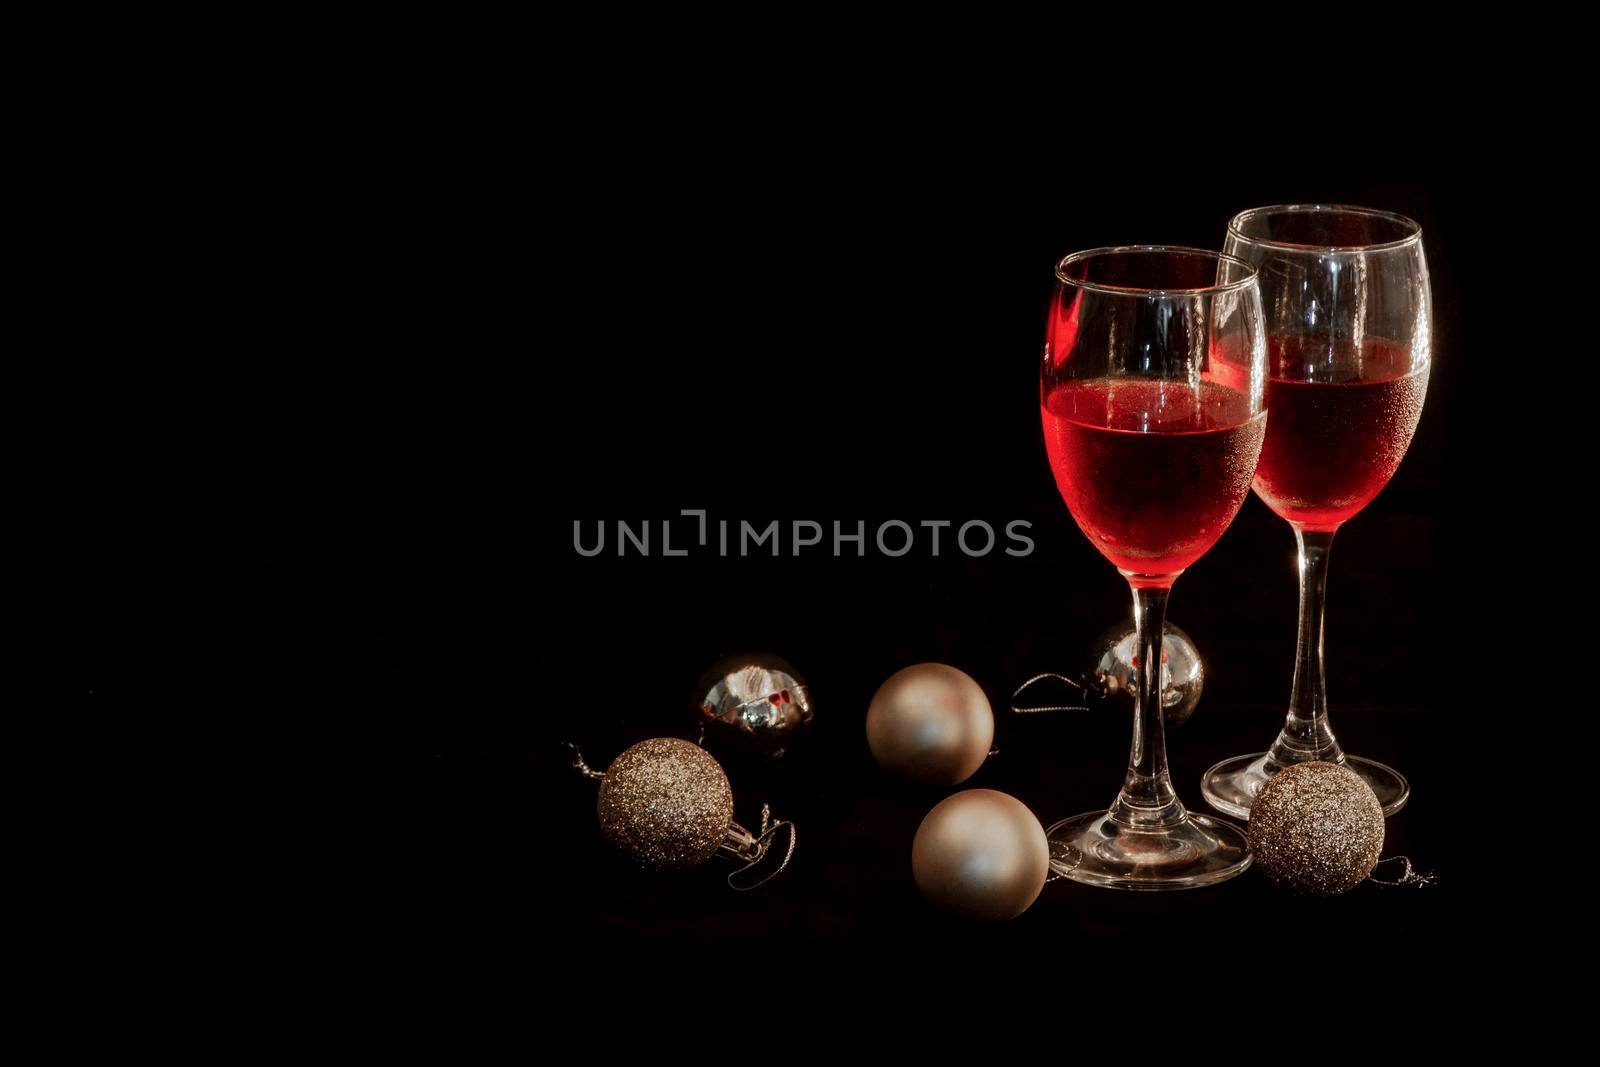 Celebration theme with  two red wine glass and Golden round ball on  black background